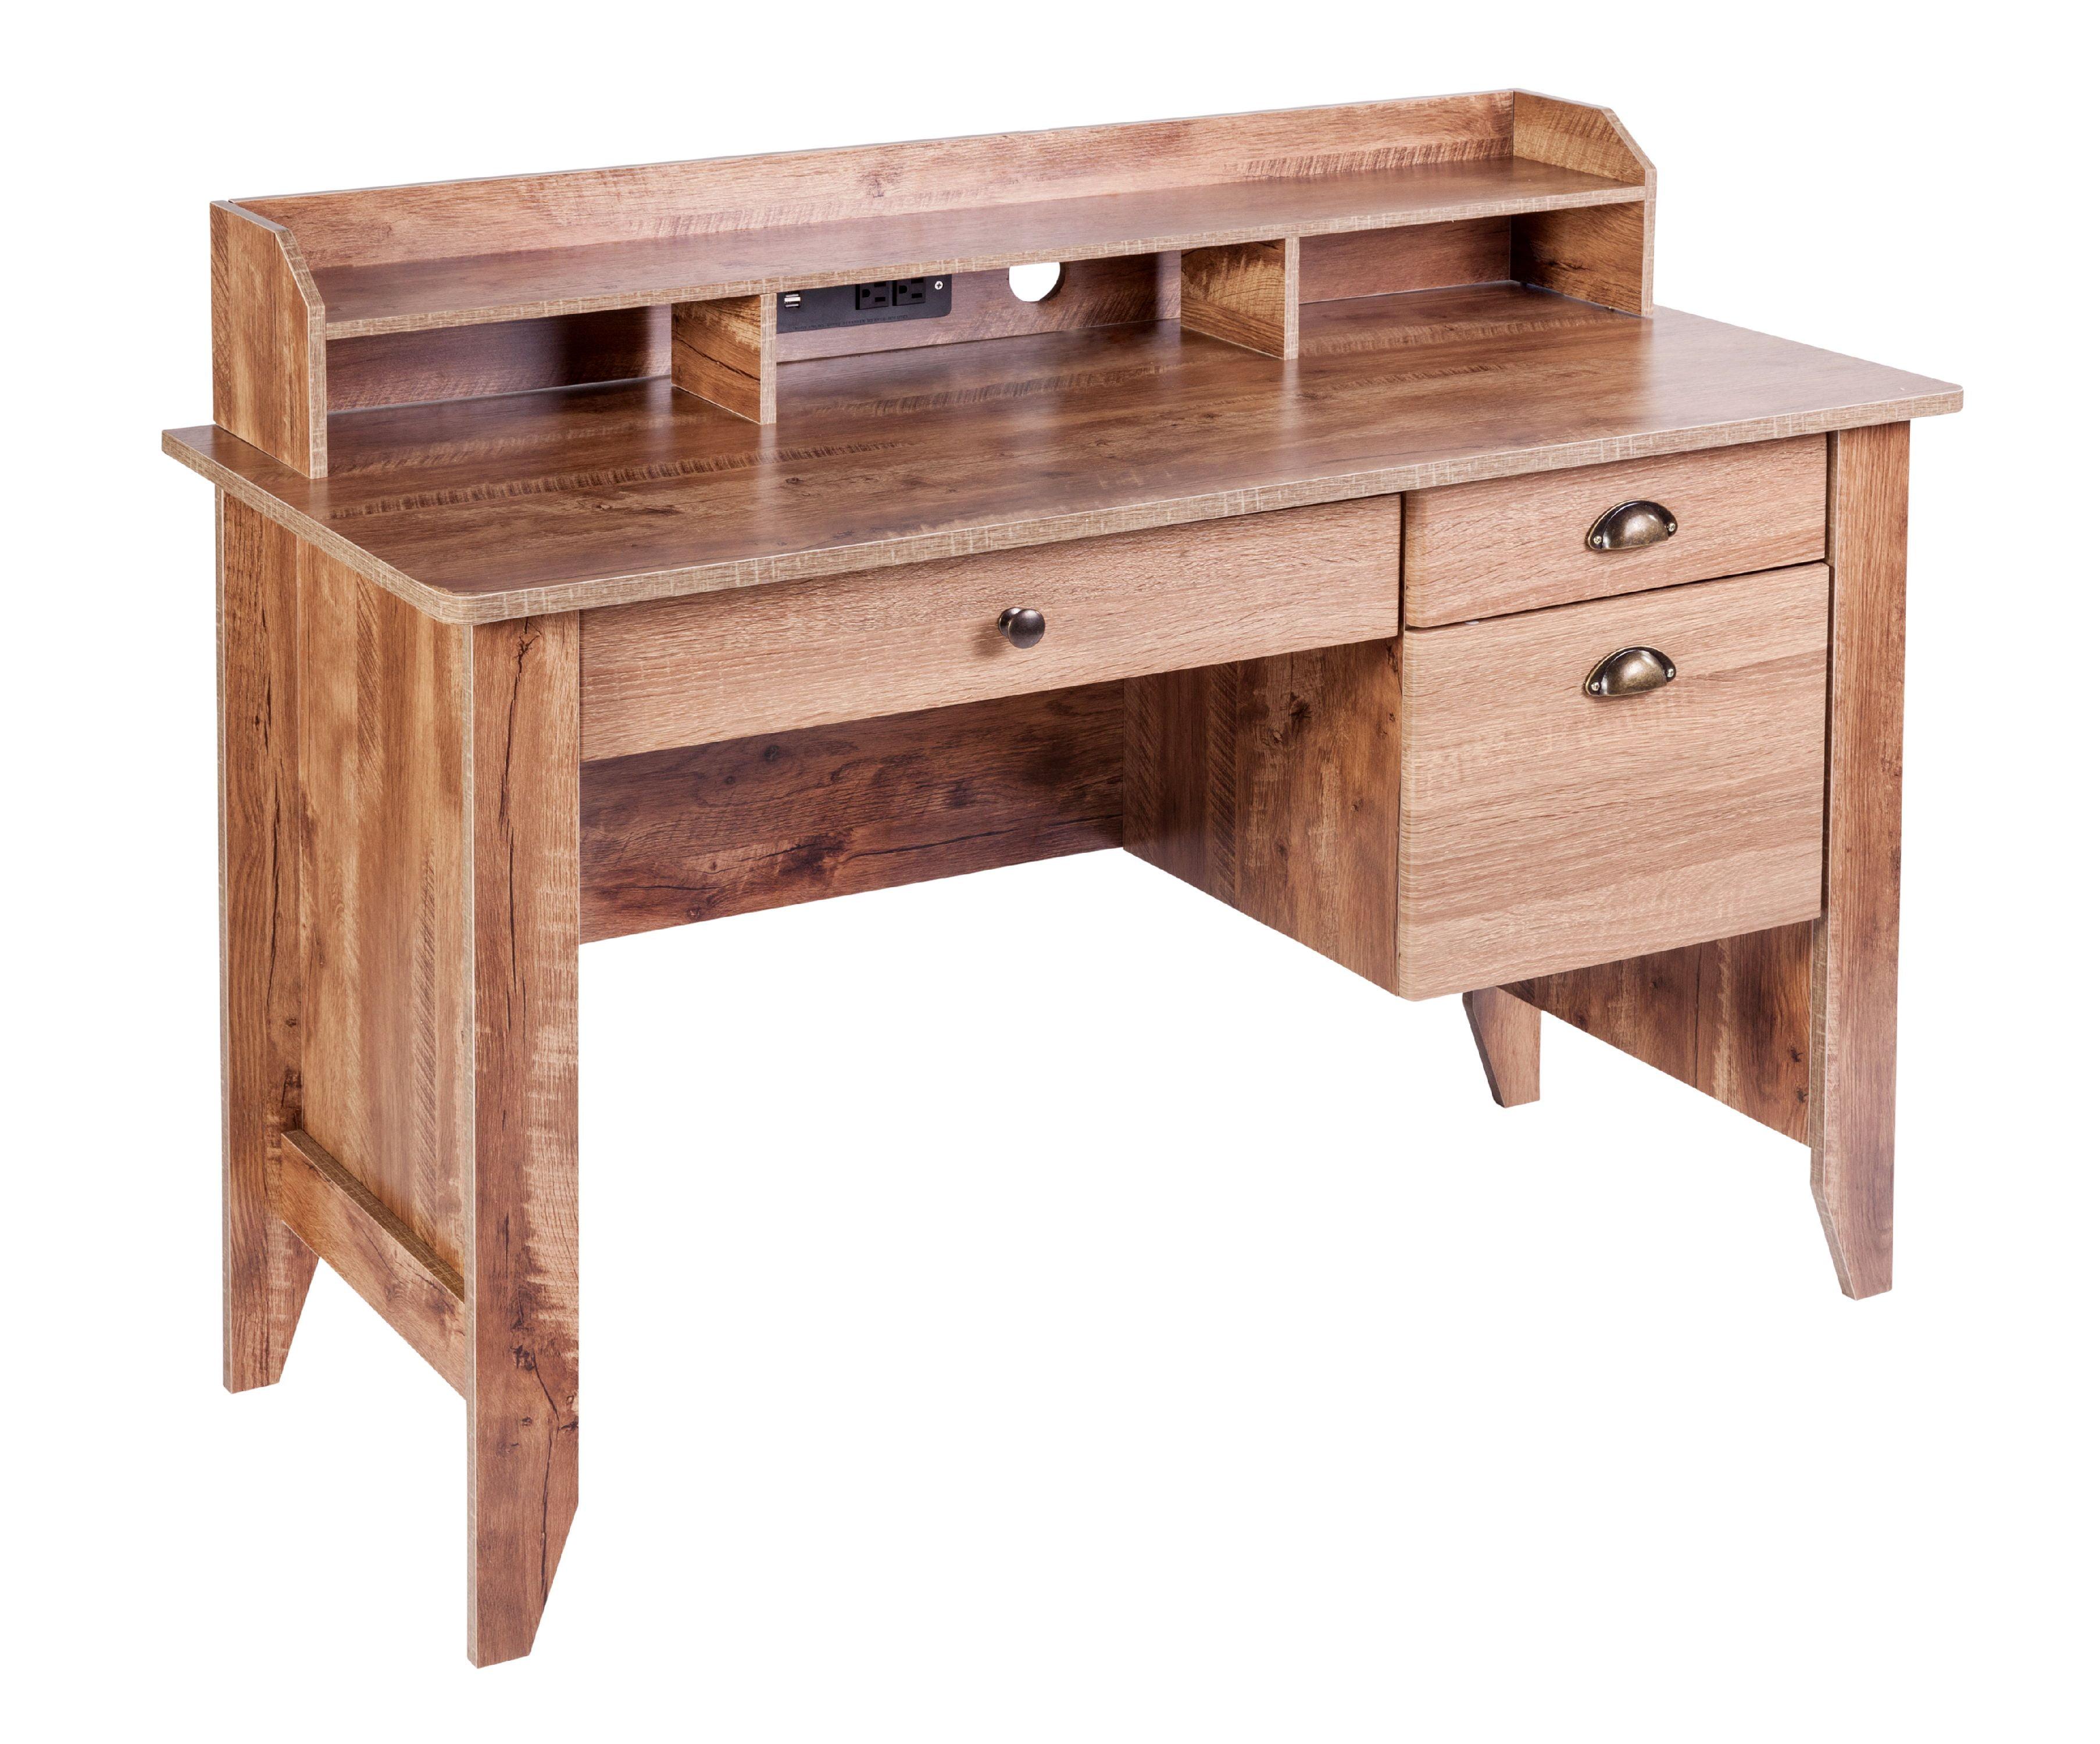 Eleanor Classic Oak Executive Desk with USB and Power Outlet